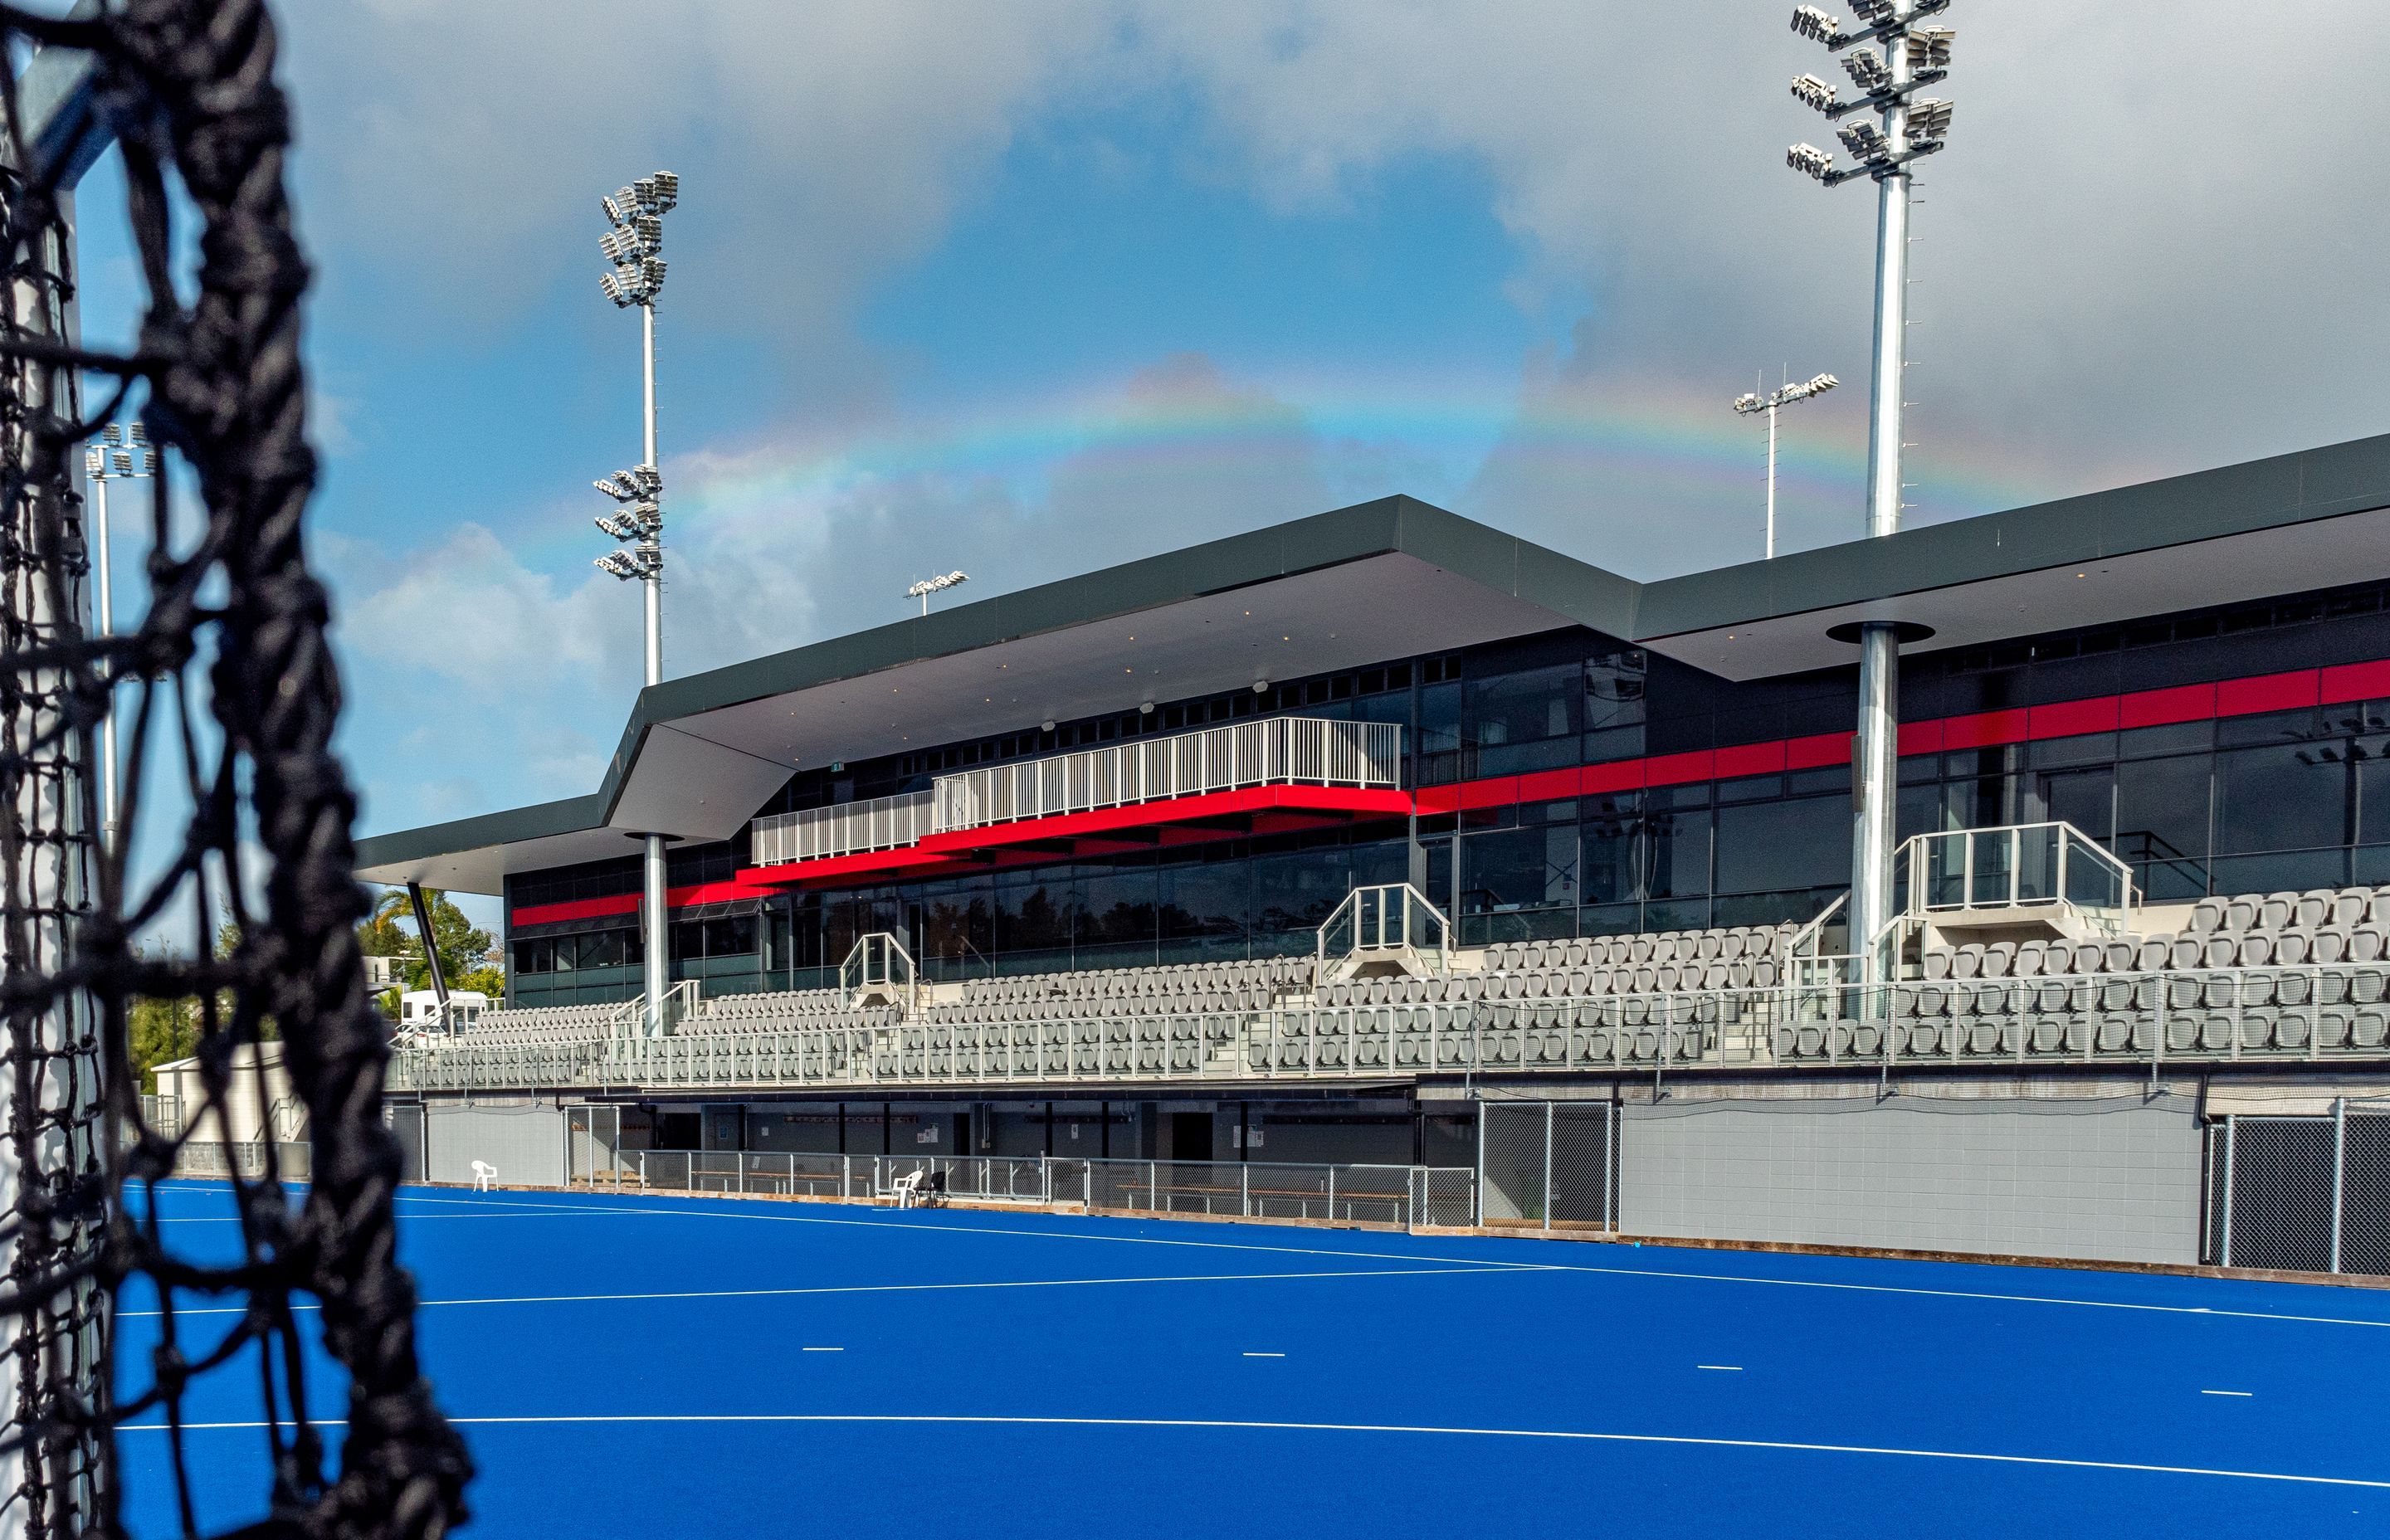 Panelab was contracted to supply, measure, fabricate and install the Solid Aluminium Alucolux System in Dark Grey Metallic and Ruby Red on the National Hockey Centre.